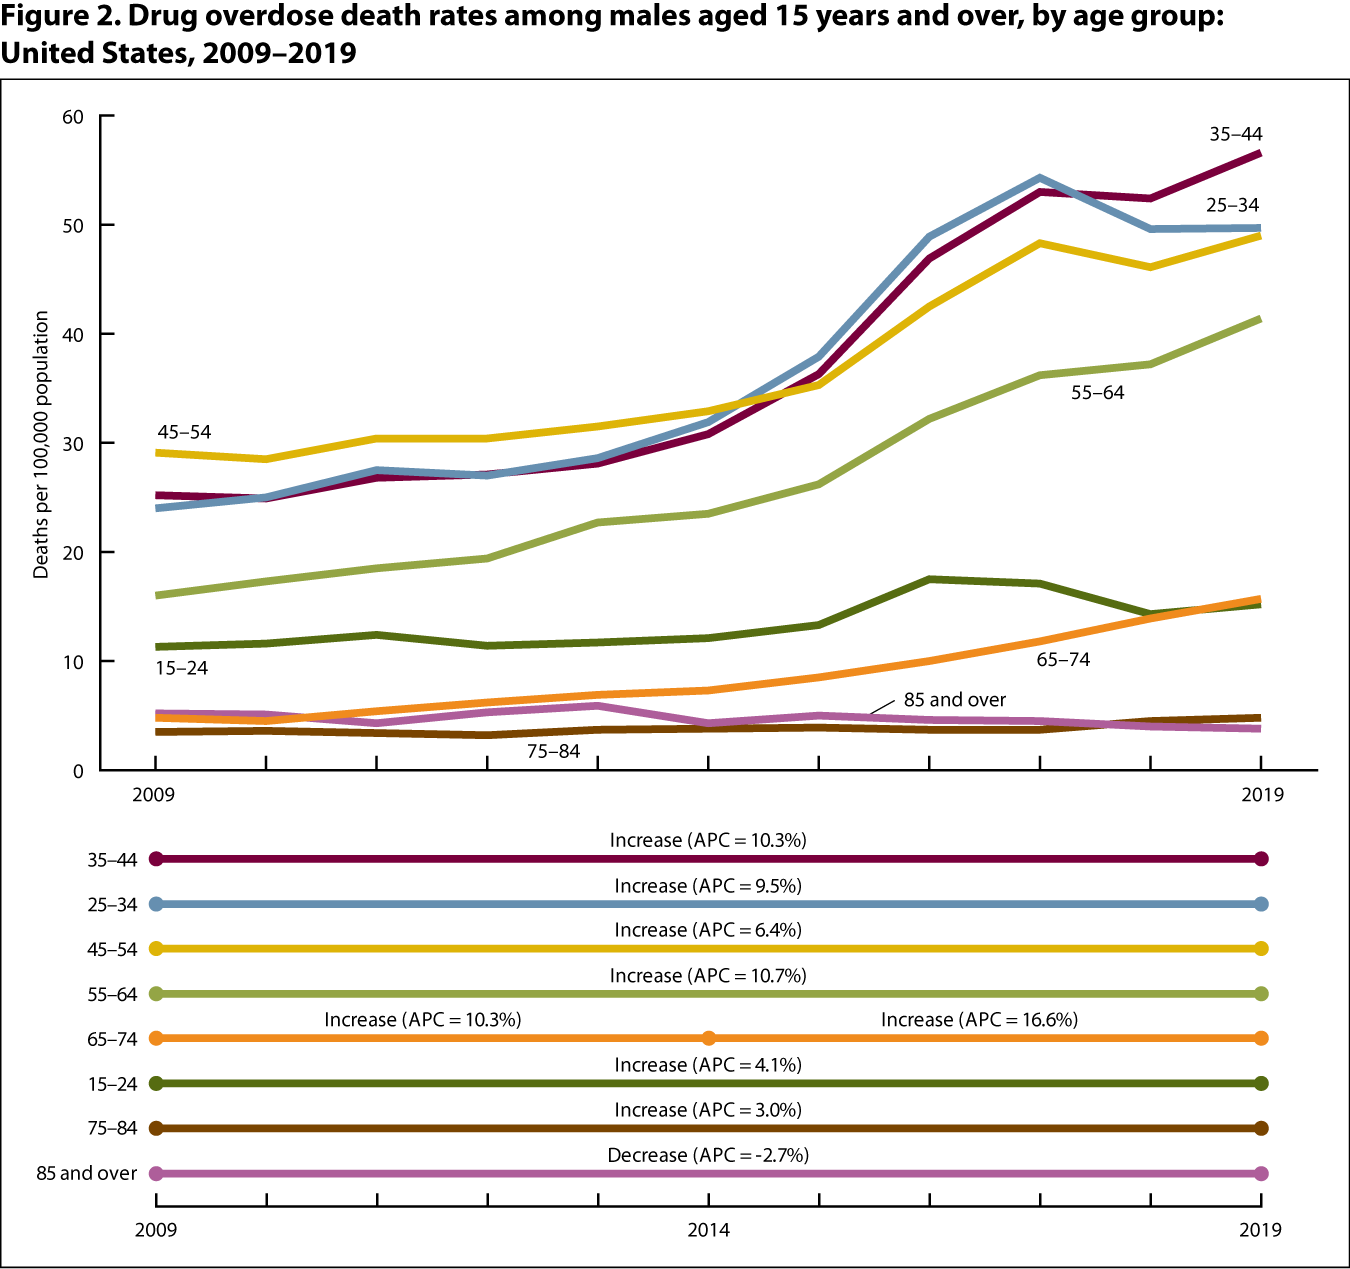 Figure 2 is a line graph showing drug overdose death rates (deaths per 100,000 population) among males aged 15 years and over by age group for 2009 through 2019.